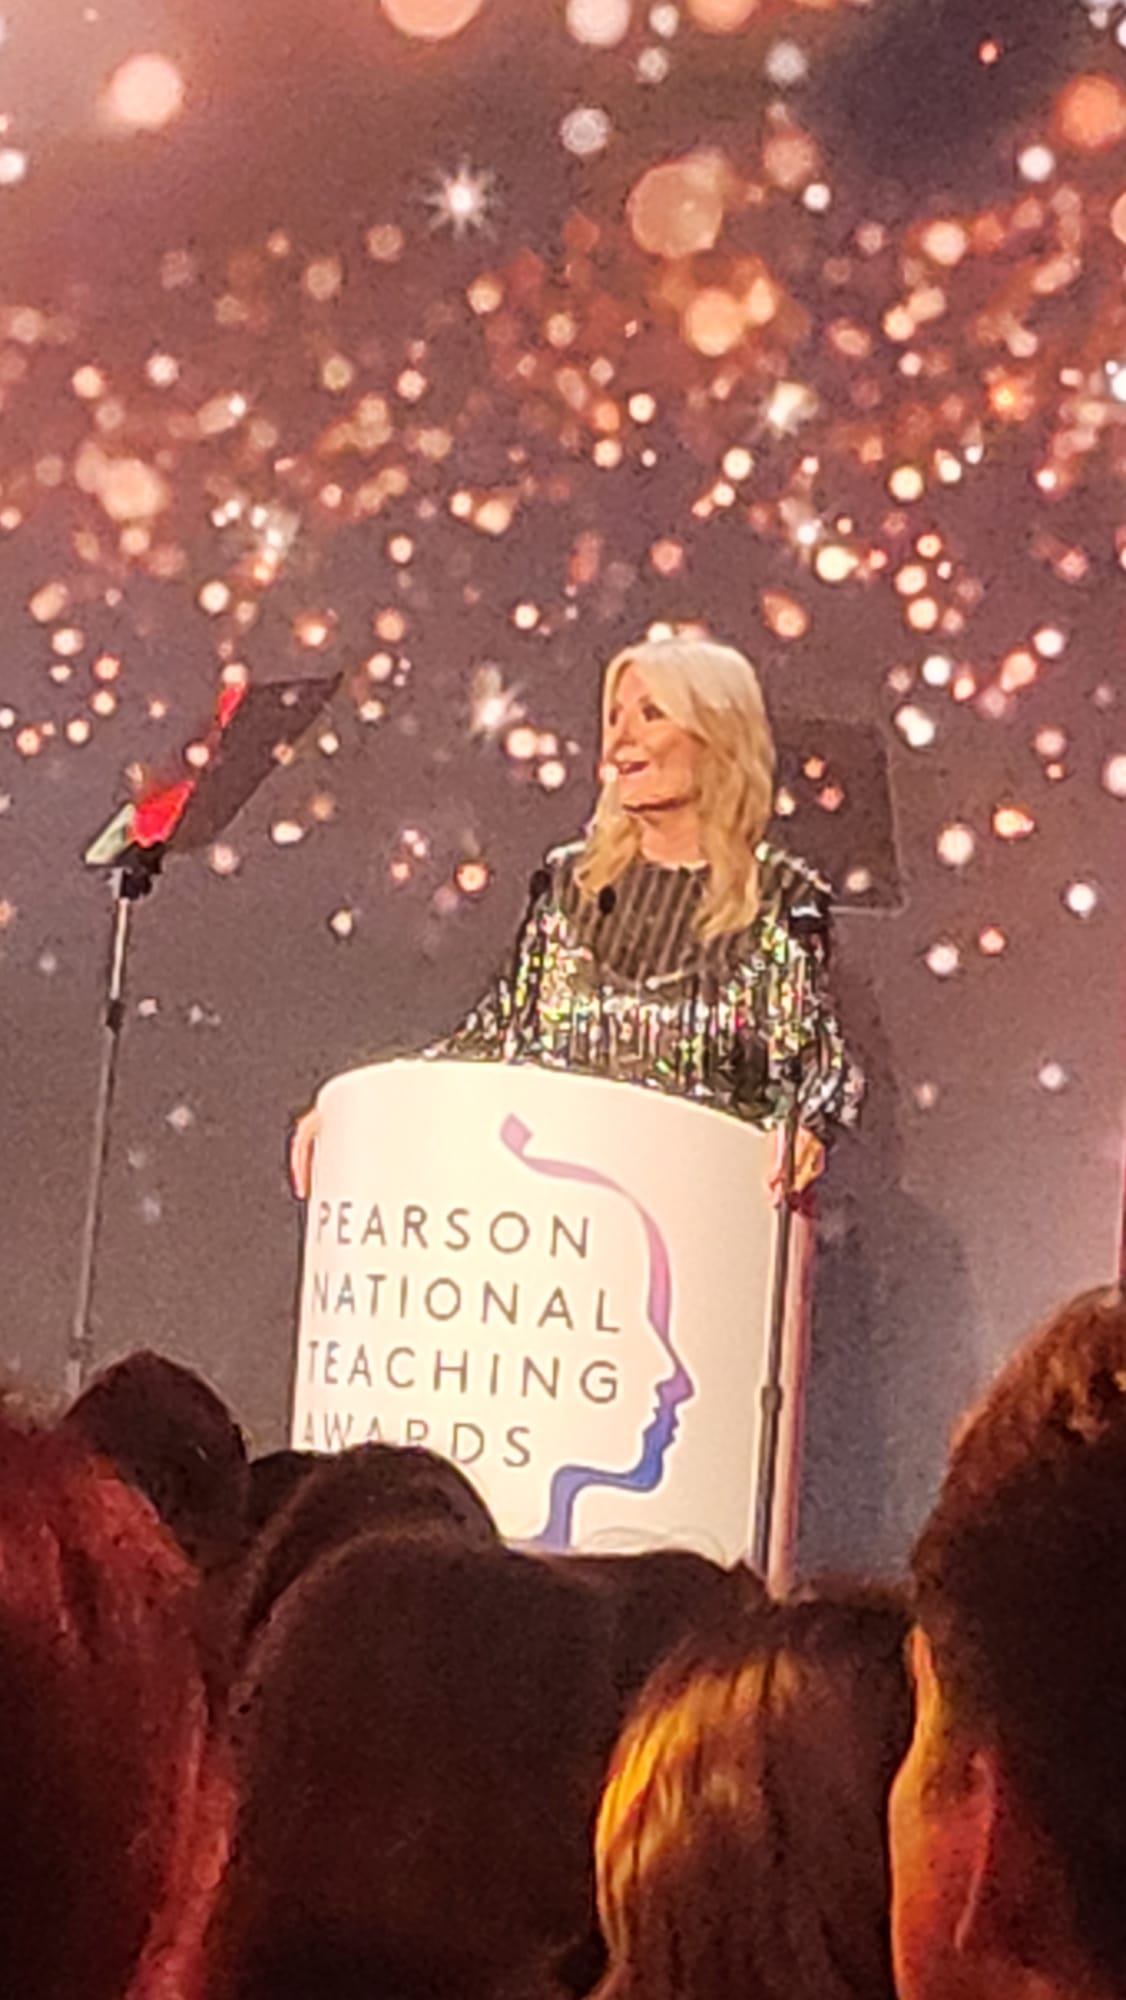 Individual hosting the Pearson National Teaching Awards